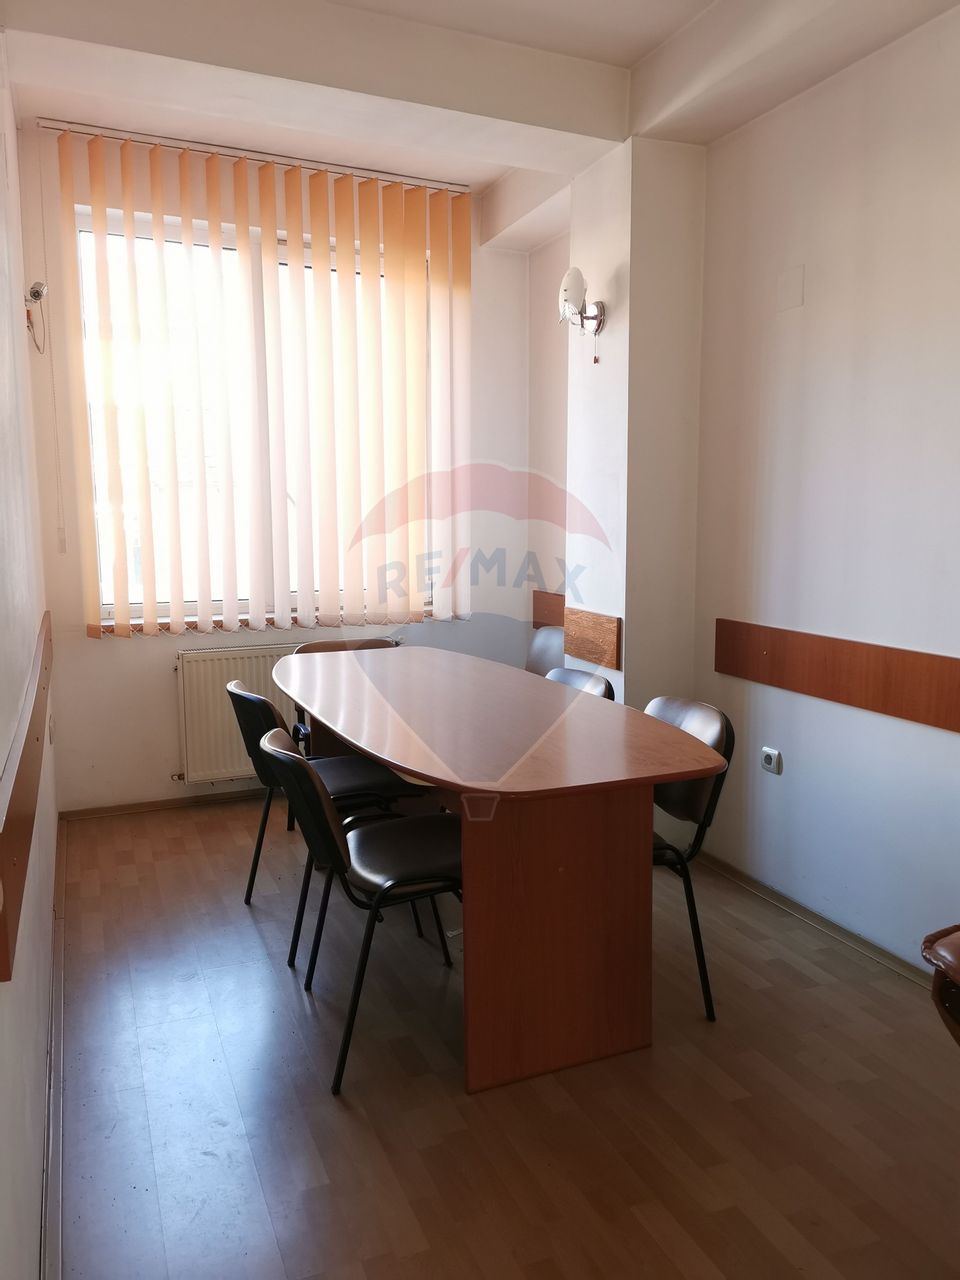 18sq.m Office Space for rent, Semicentral area